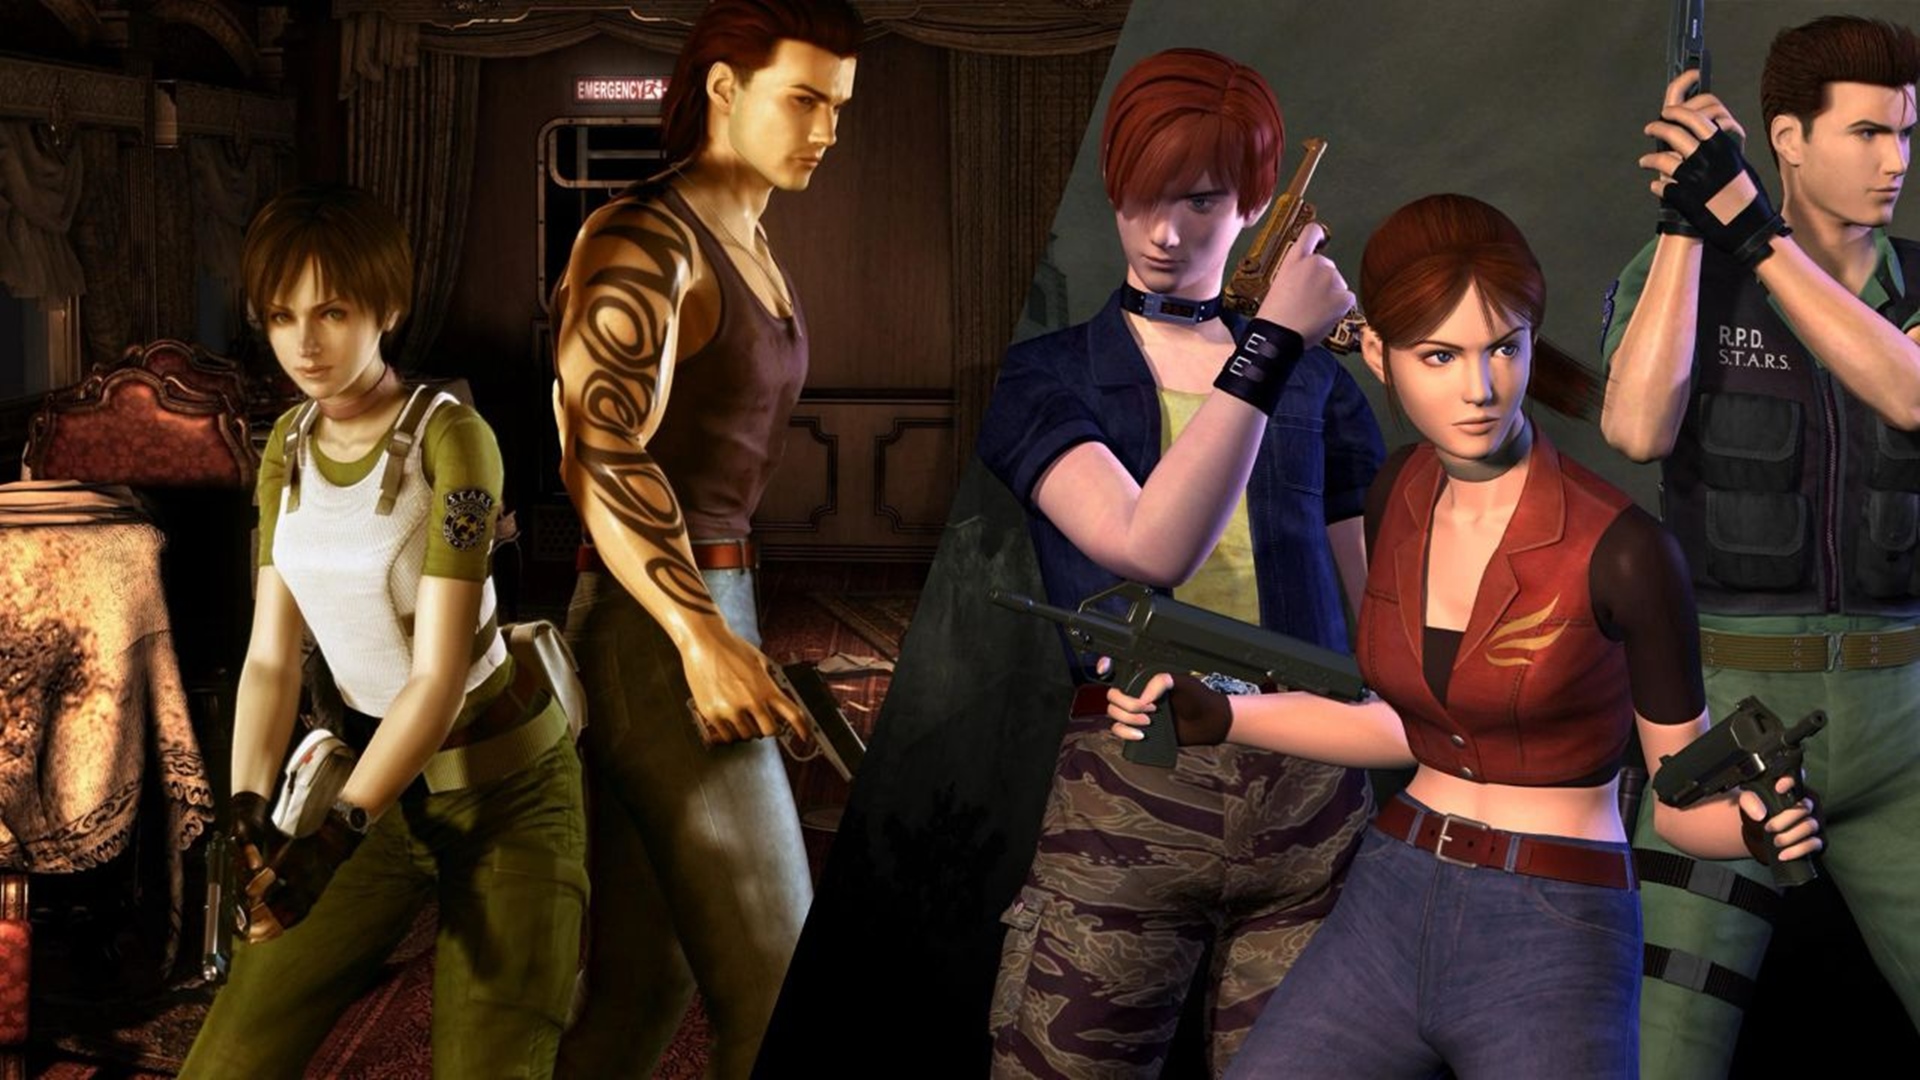 What will be the next game in the Resident Evil franchise?